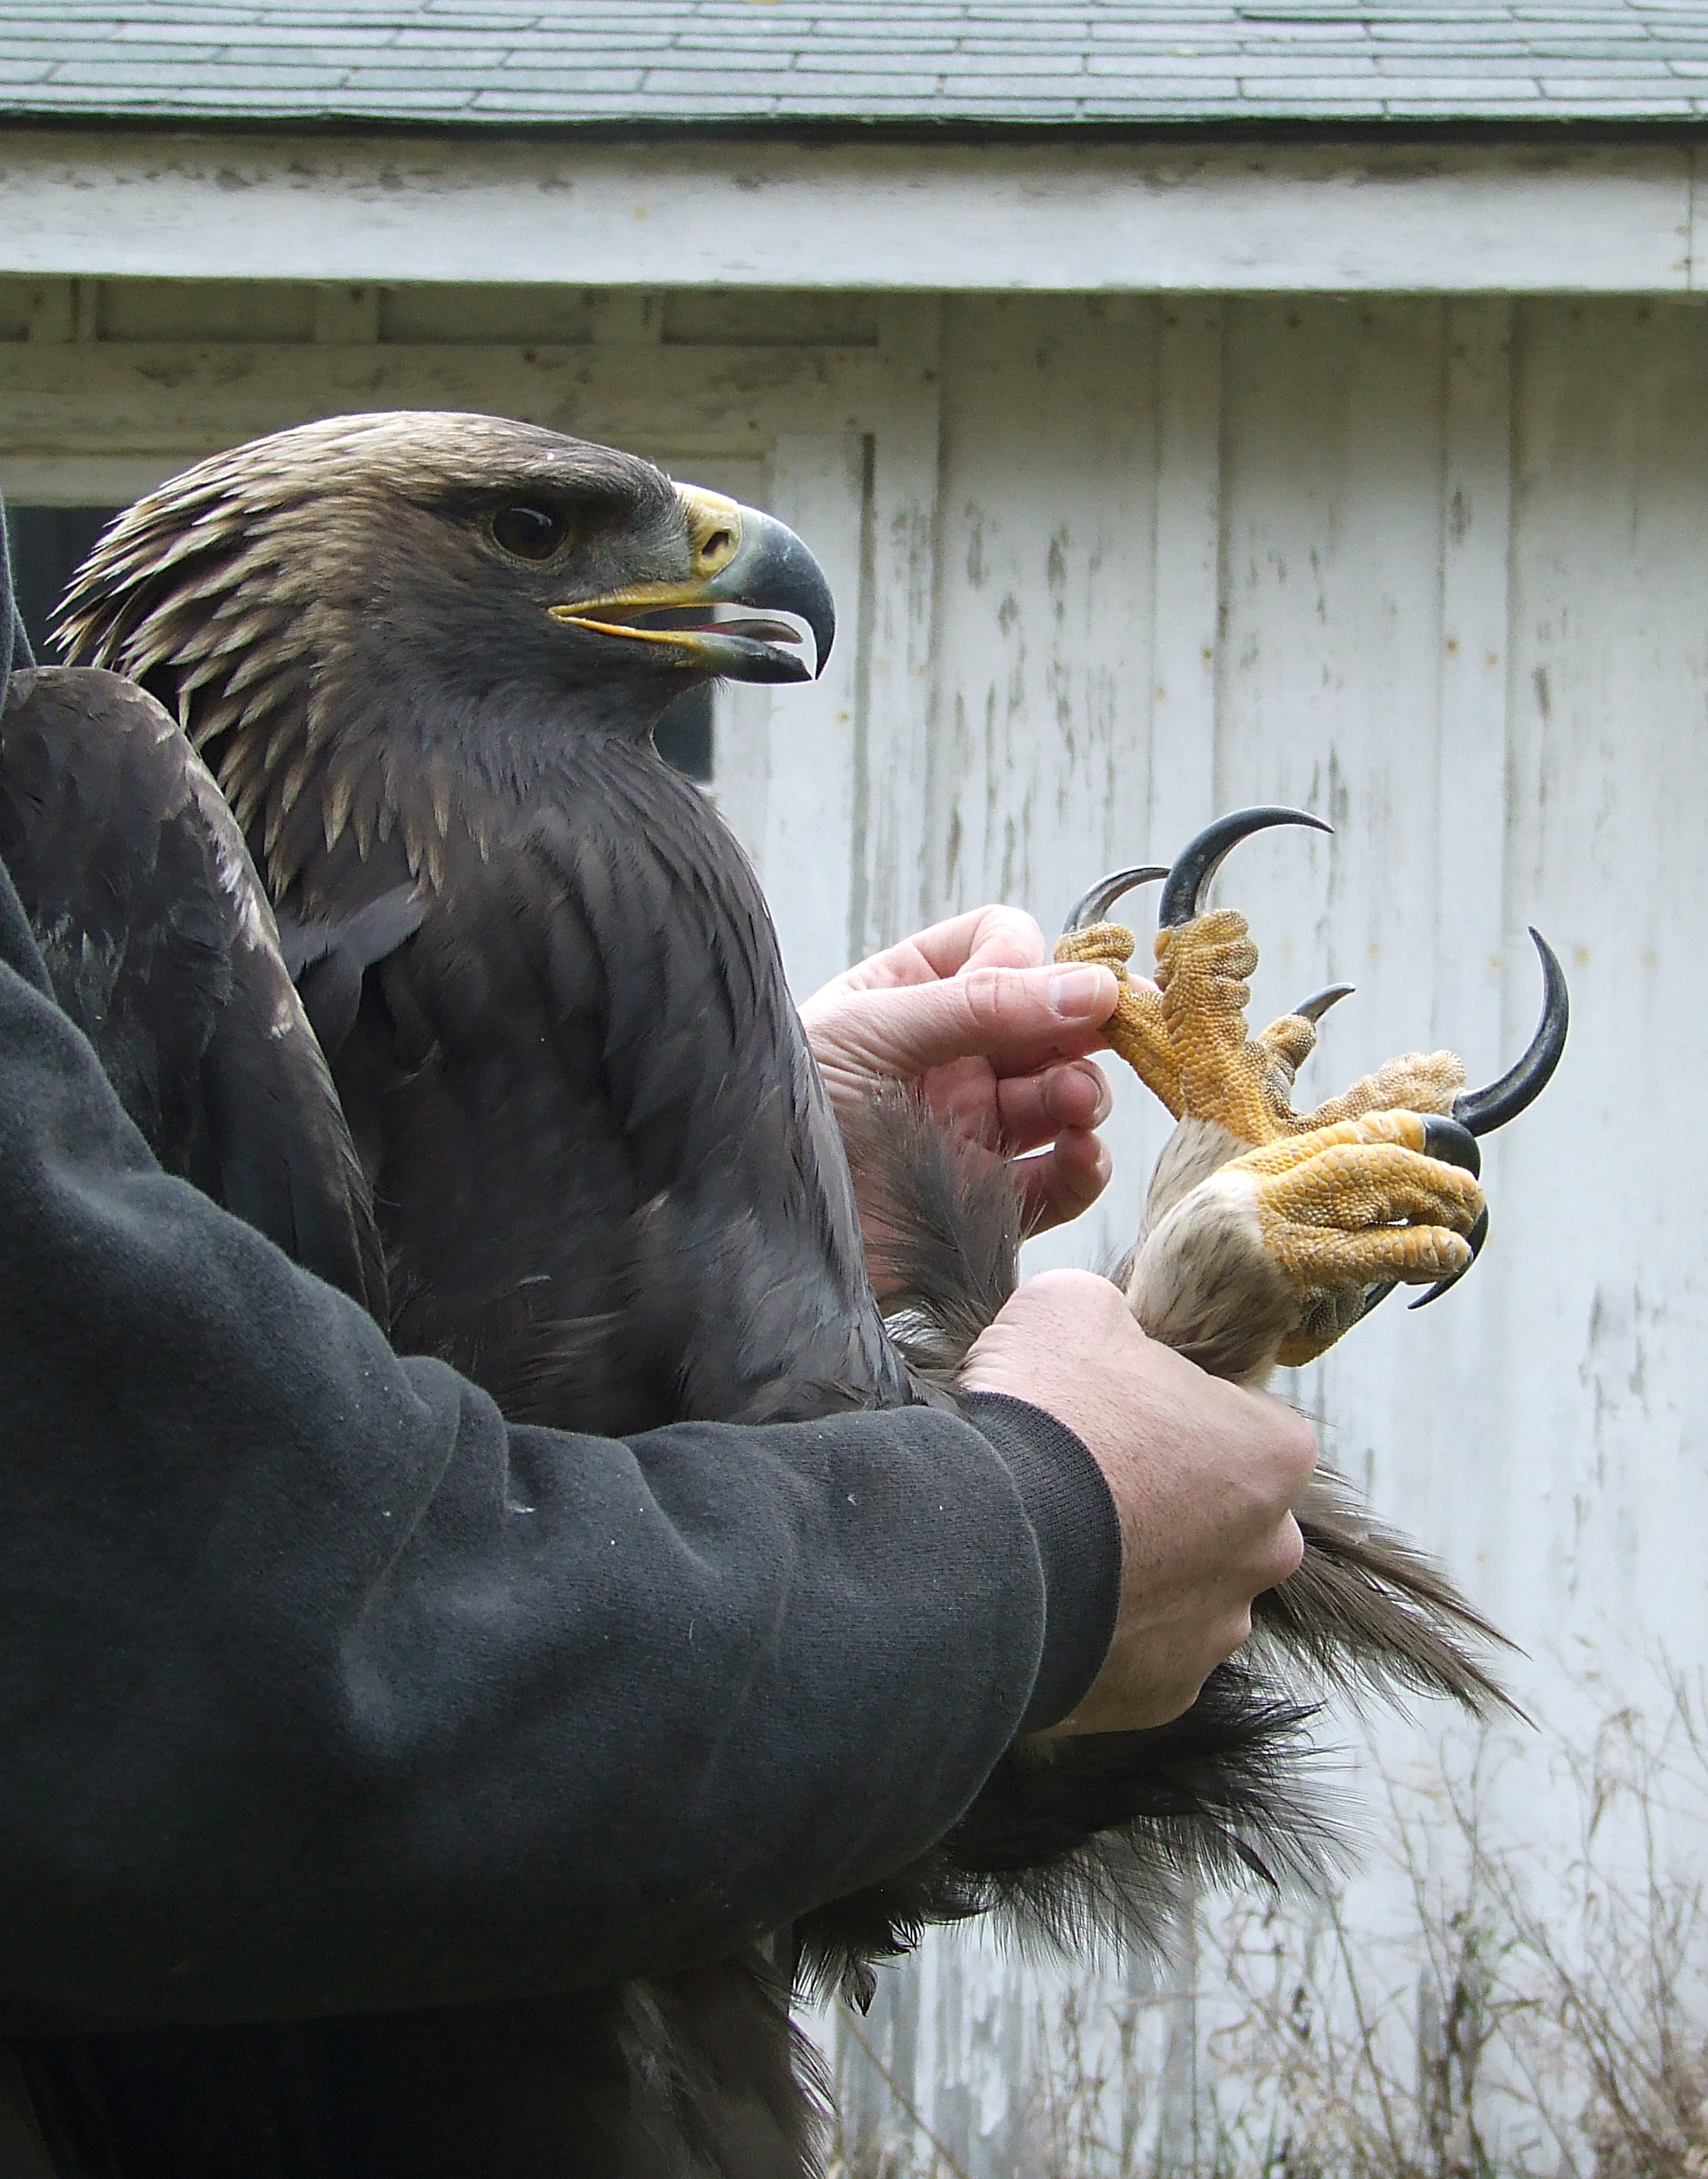 The golden eagle is the ultimate bird of prey